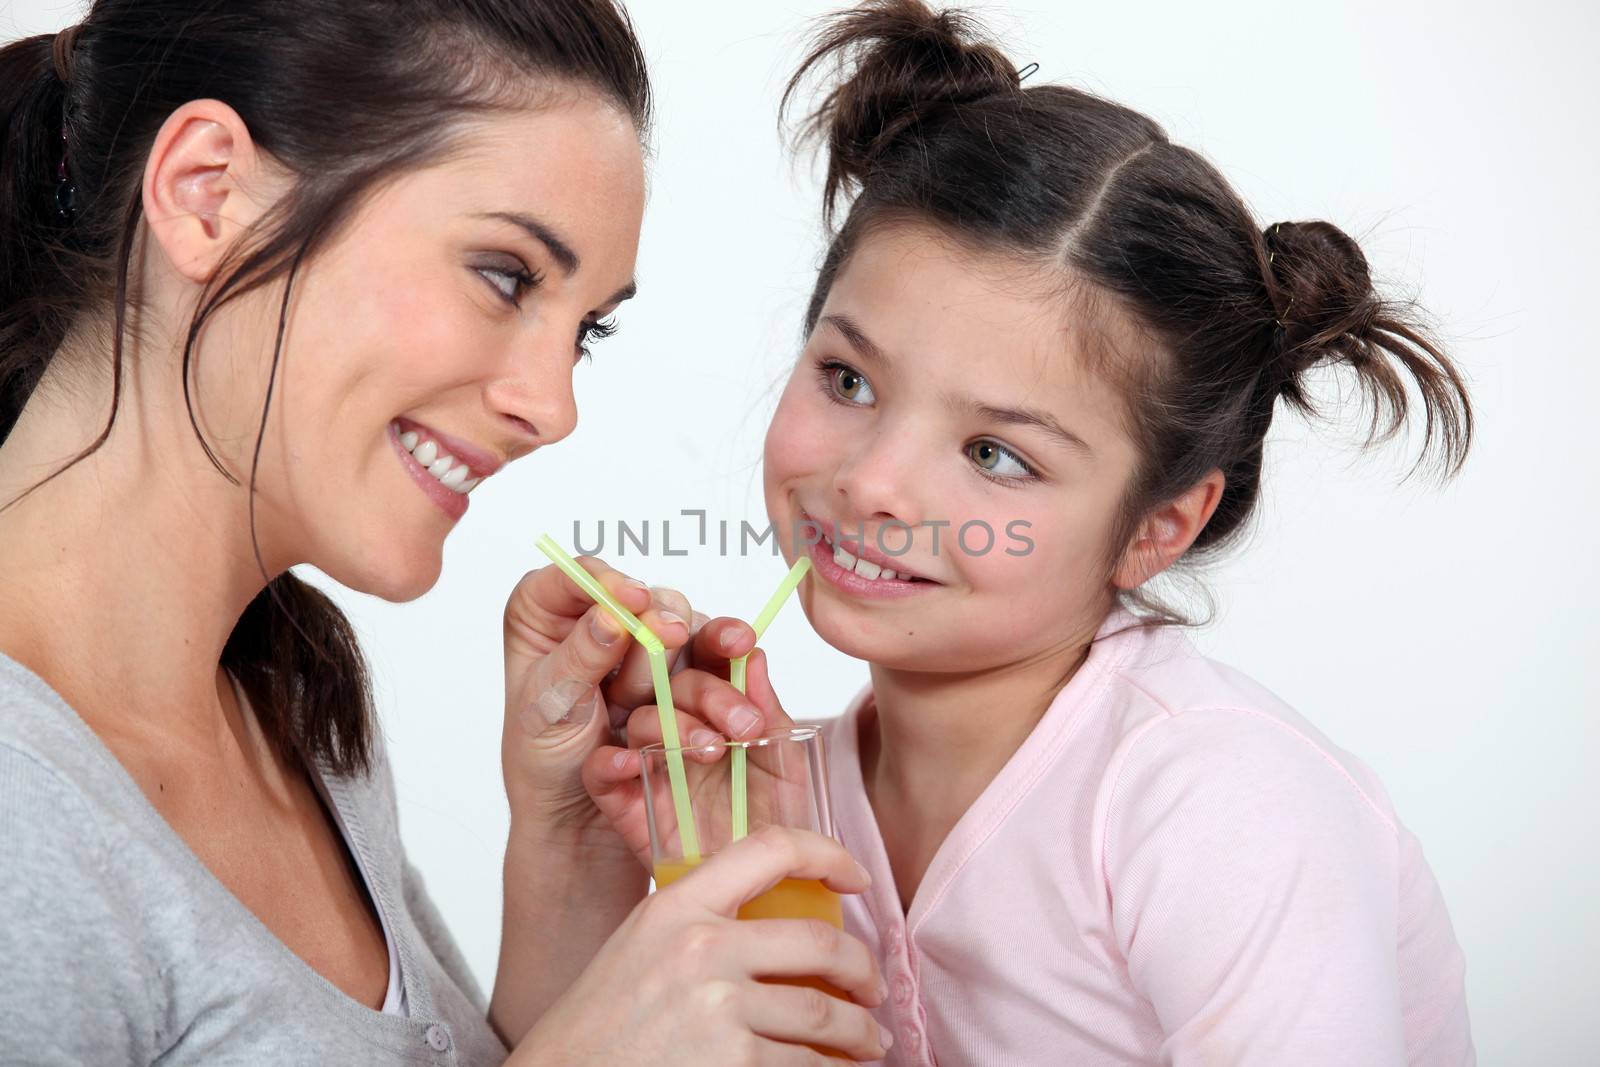 Woman sharing a glass of juice with her little sister